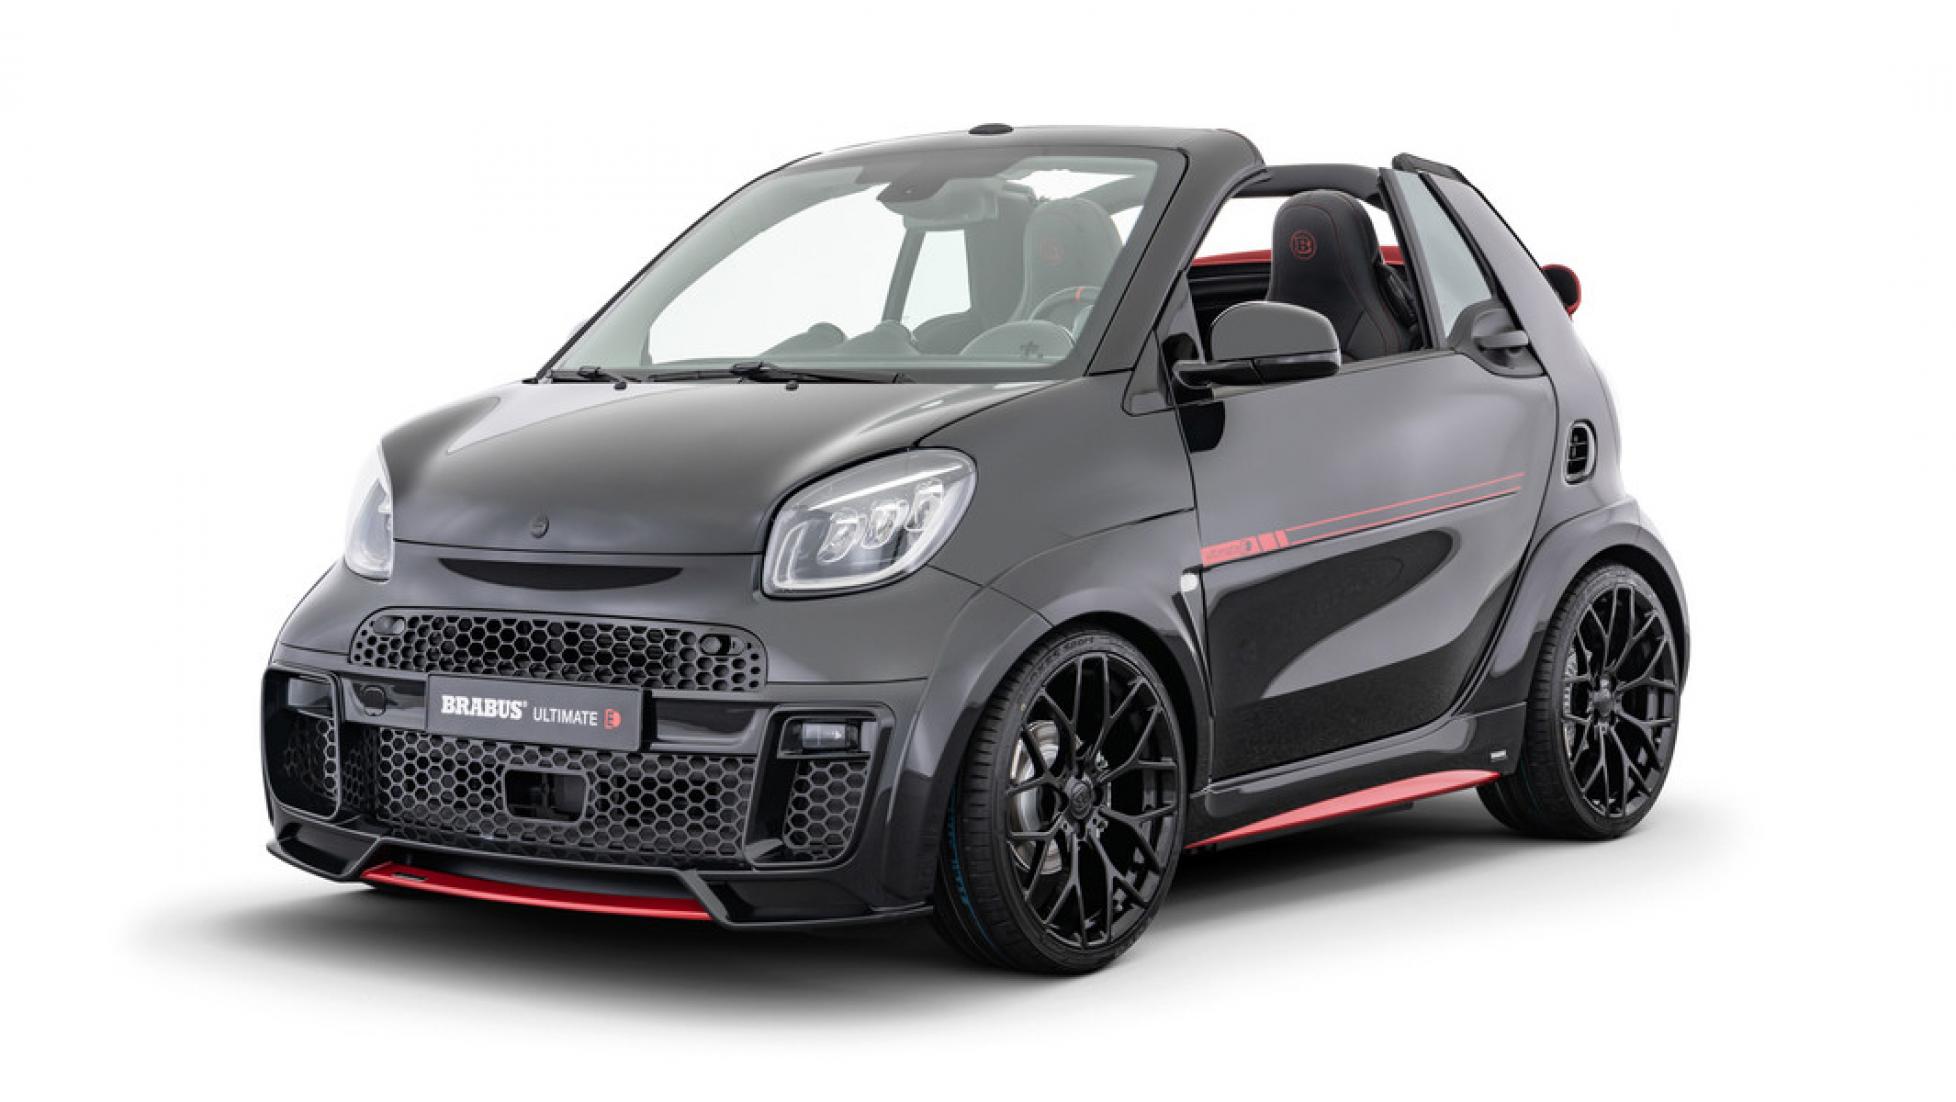 TopGear Brabus has got its hands on the electric Smart EQ fortwo